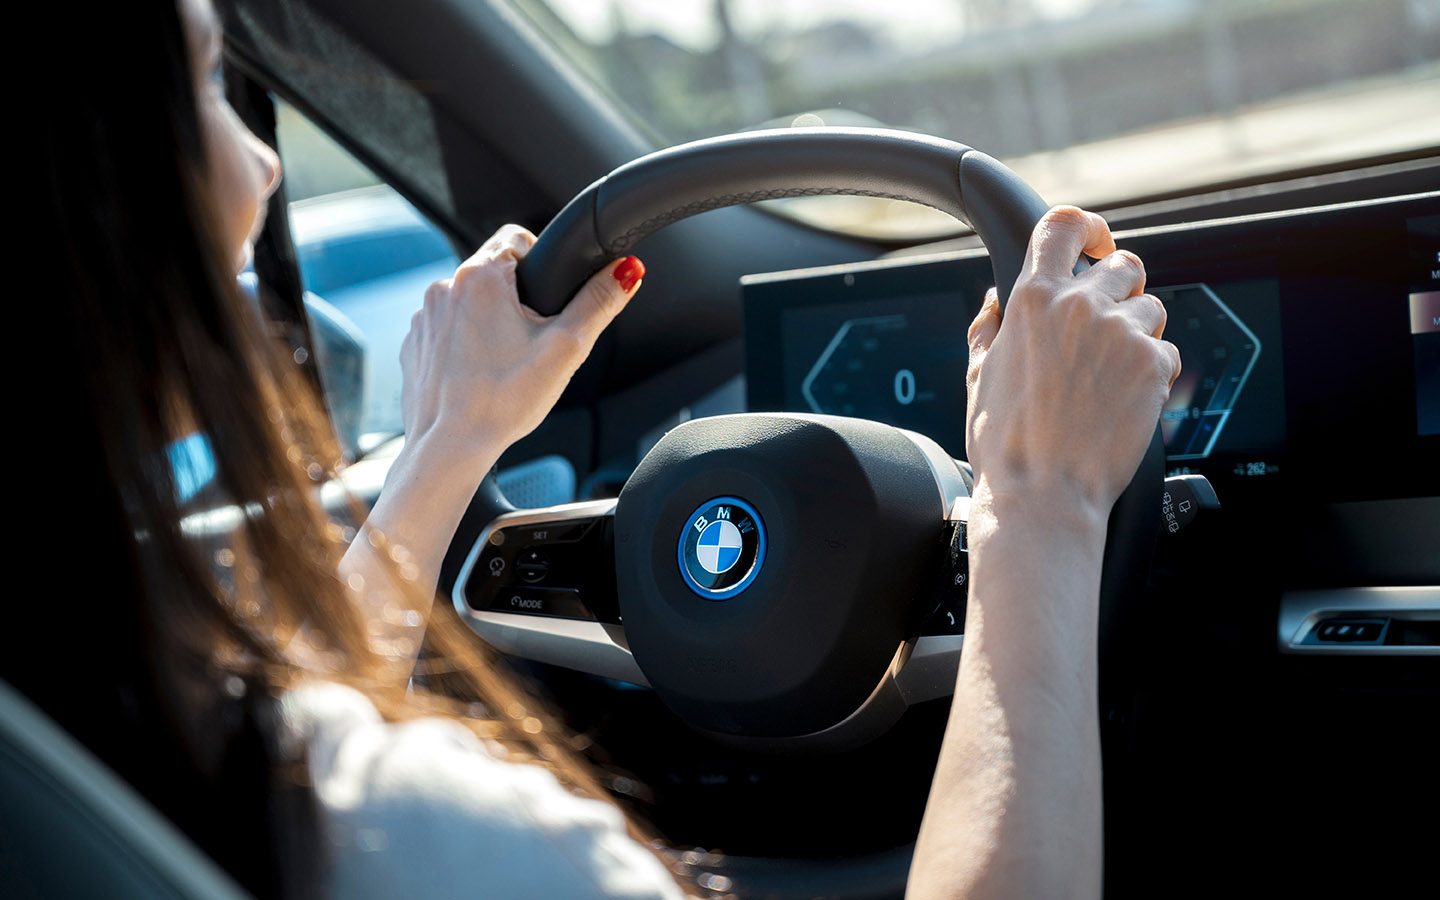 the BMW shy tech helps to enhance driving experience